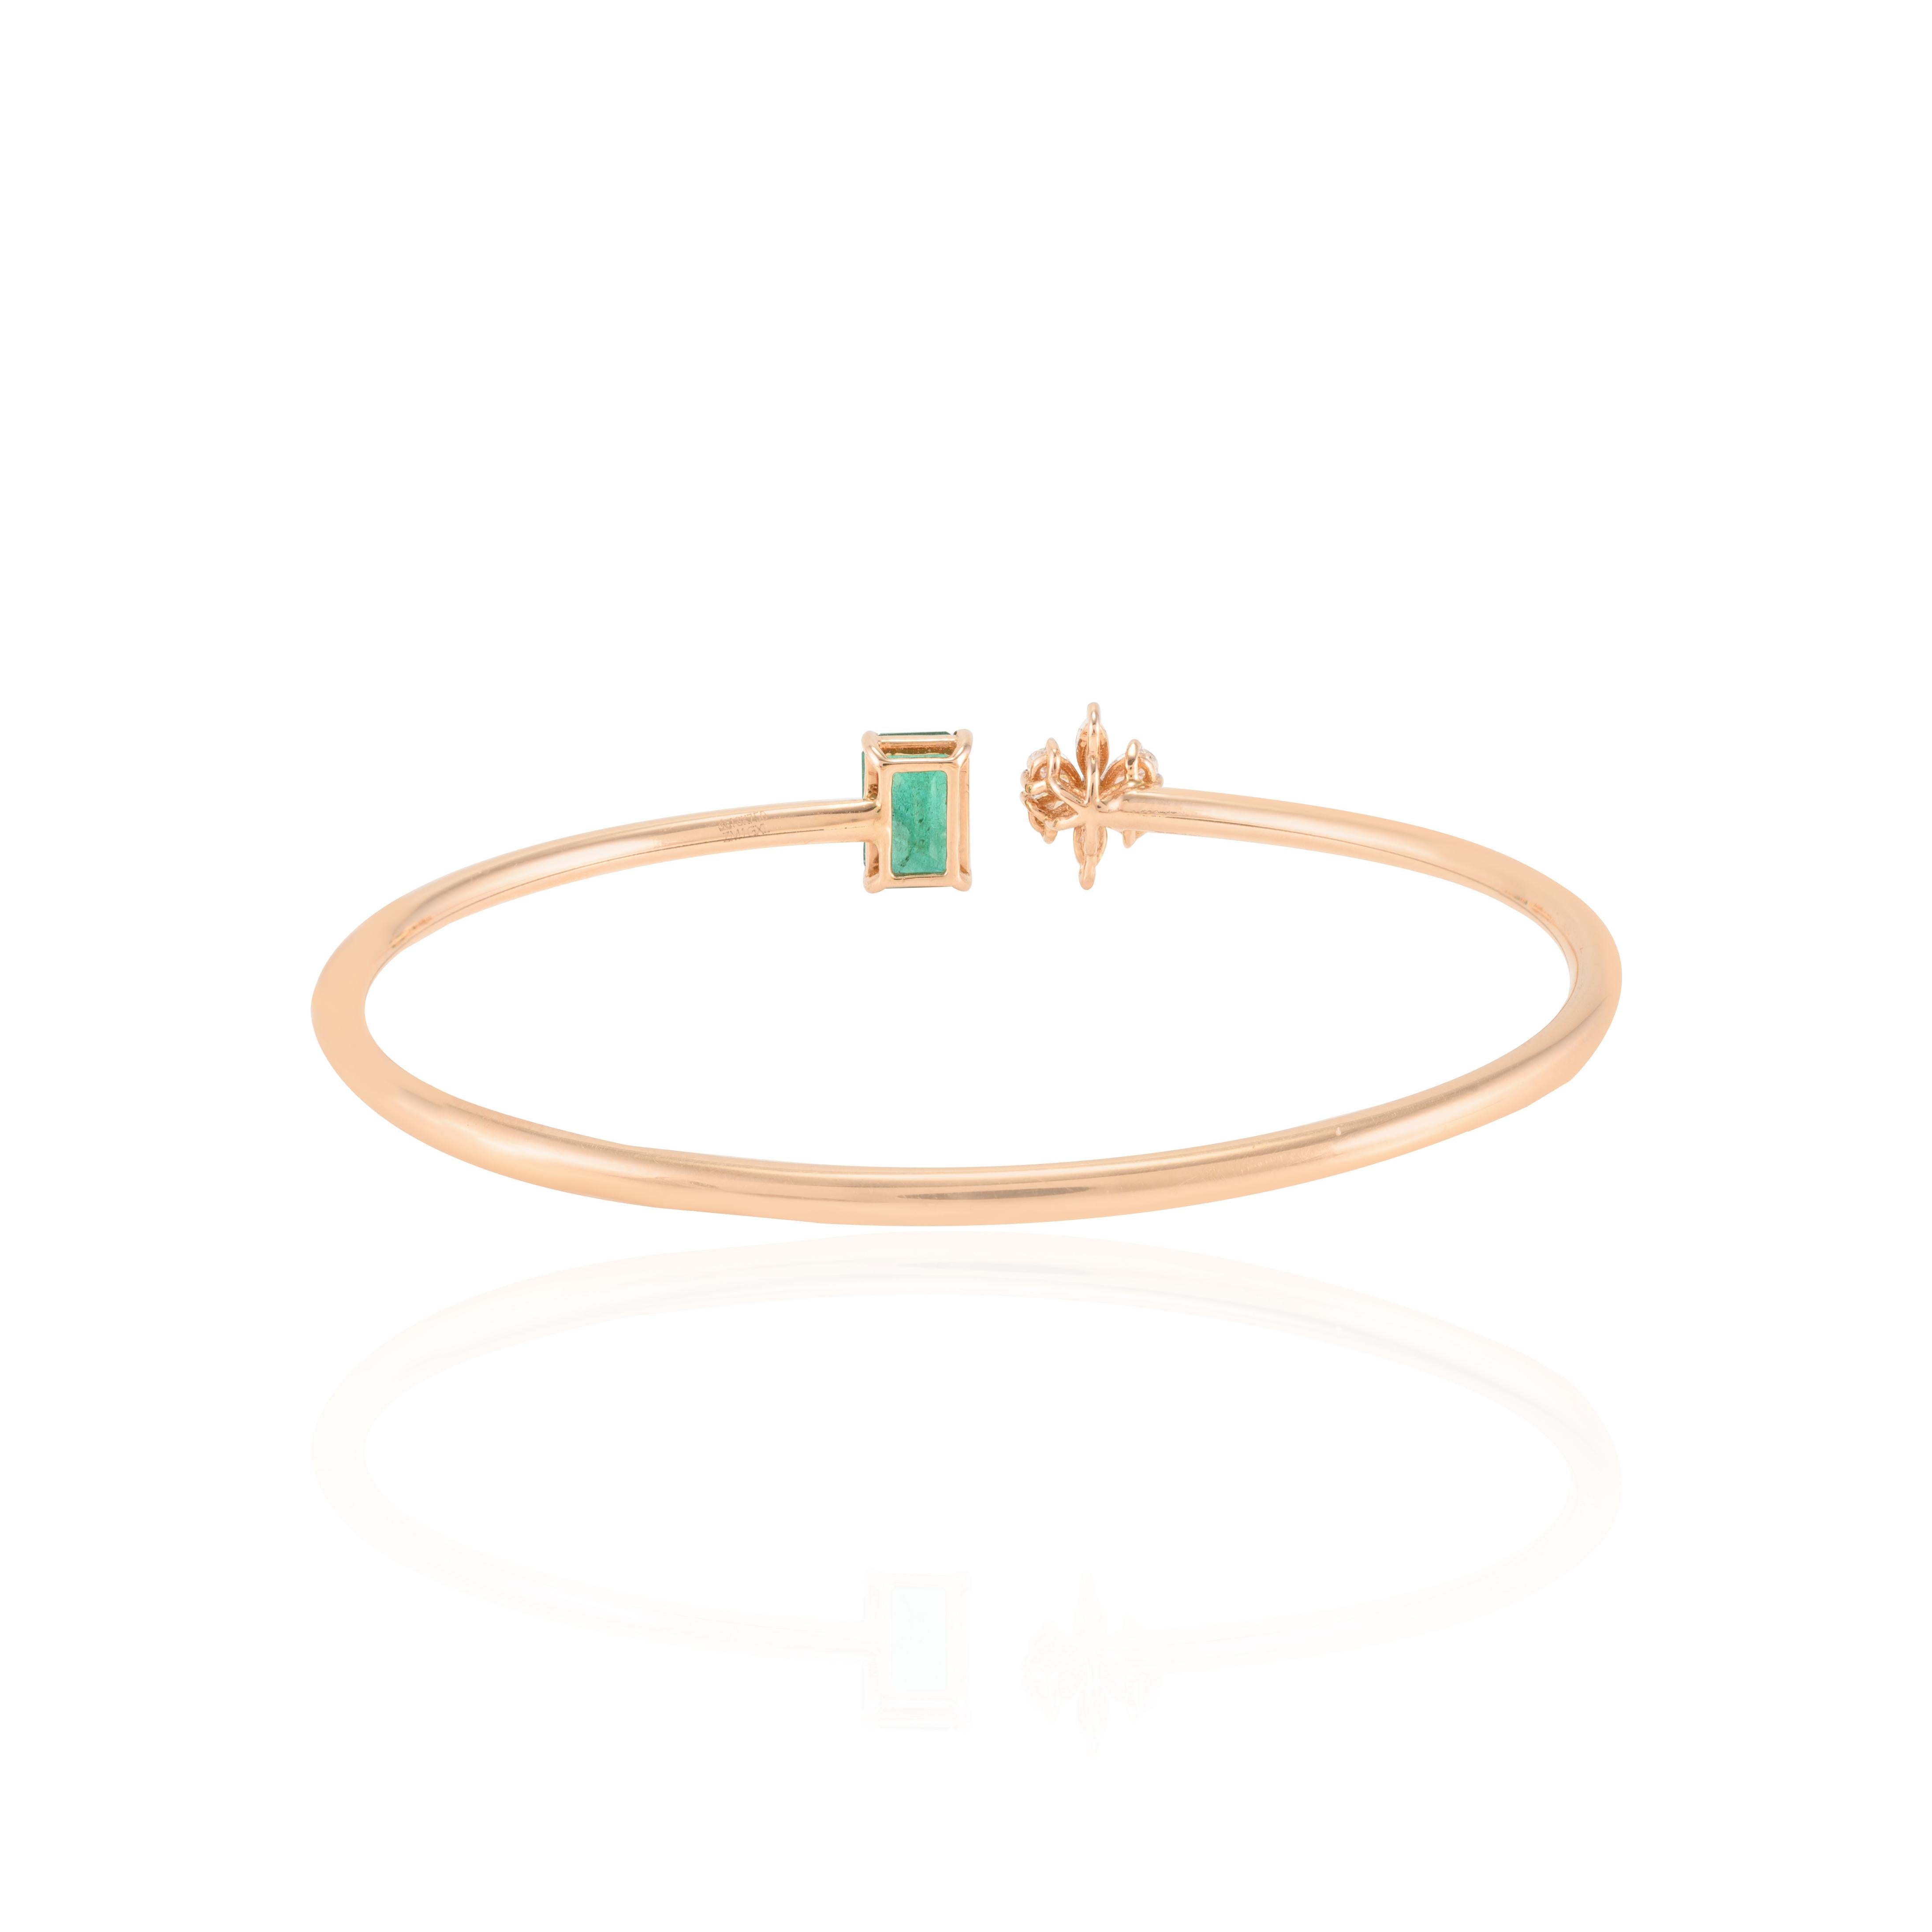 Octagon Cut Genuine Emerald and Diamond Flower Cuff Bracelet in 18k Rose Gold for Her For Sale